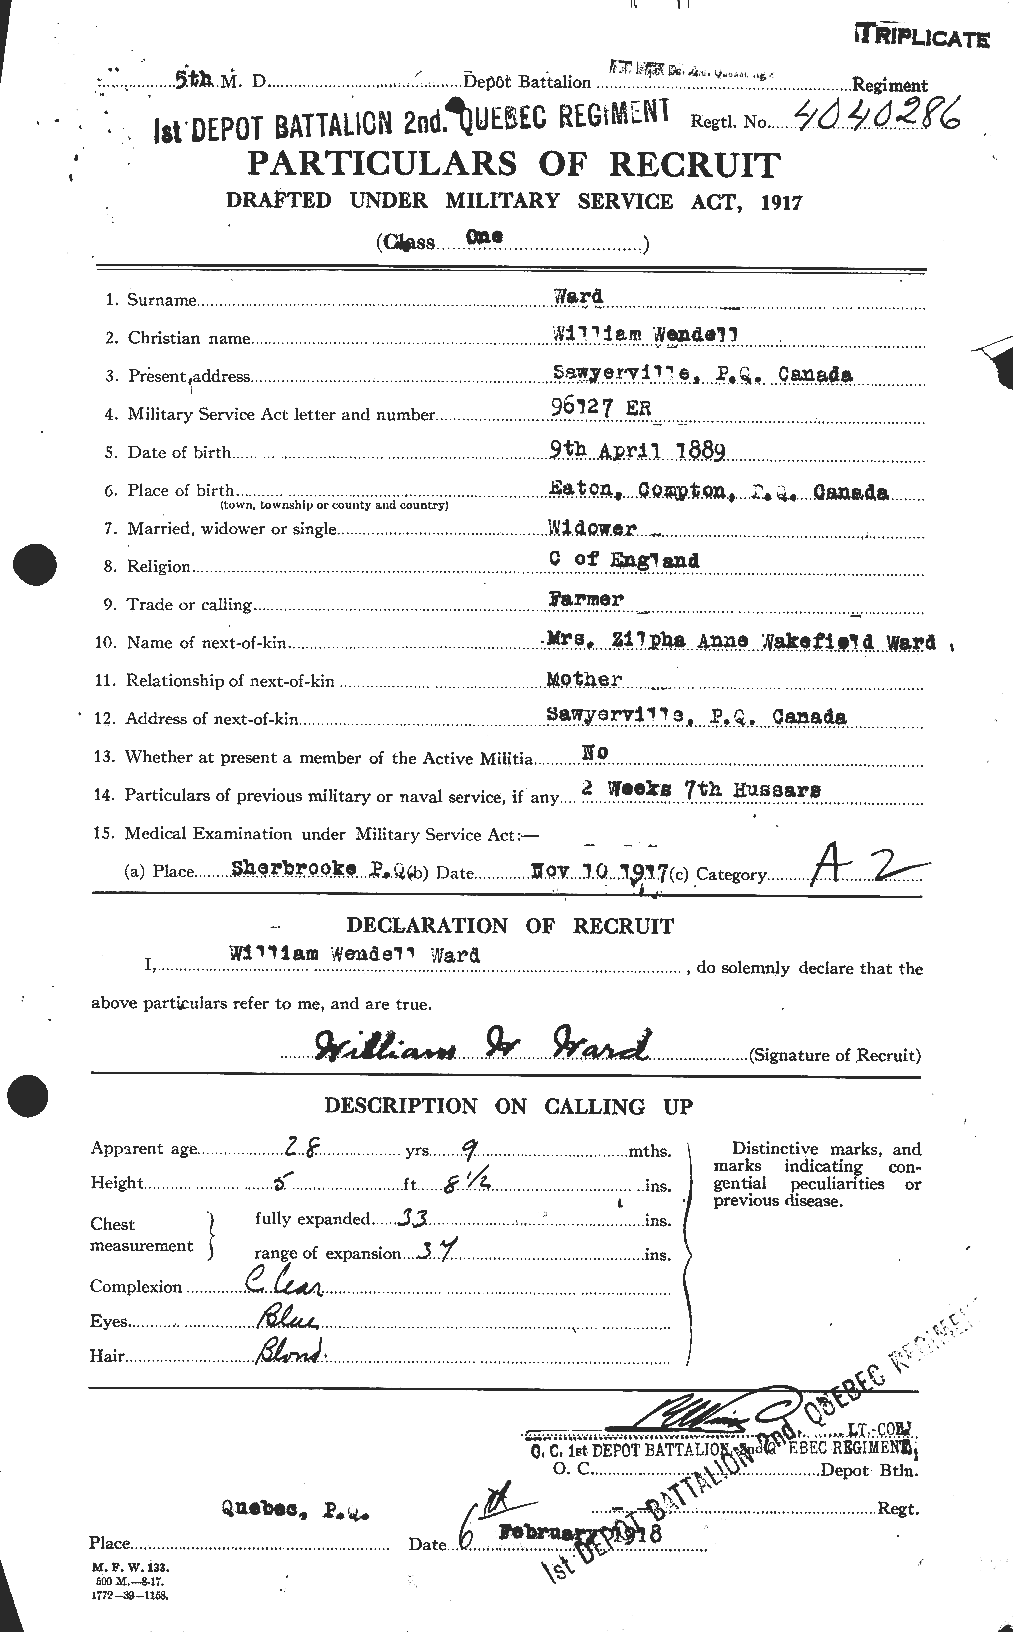 Personnel Records of the First World War - CEF 659851a